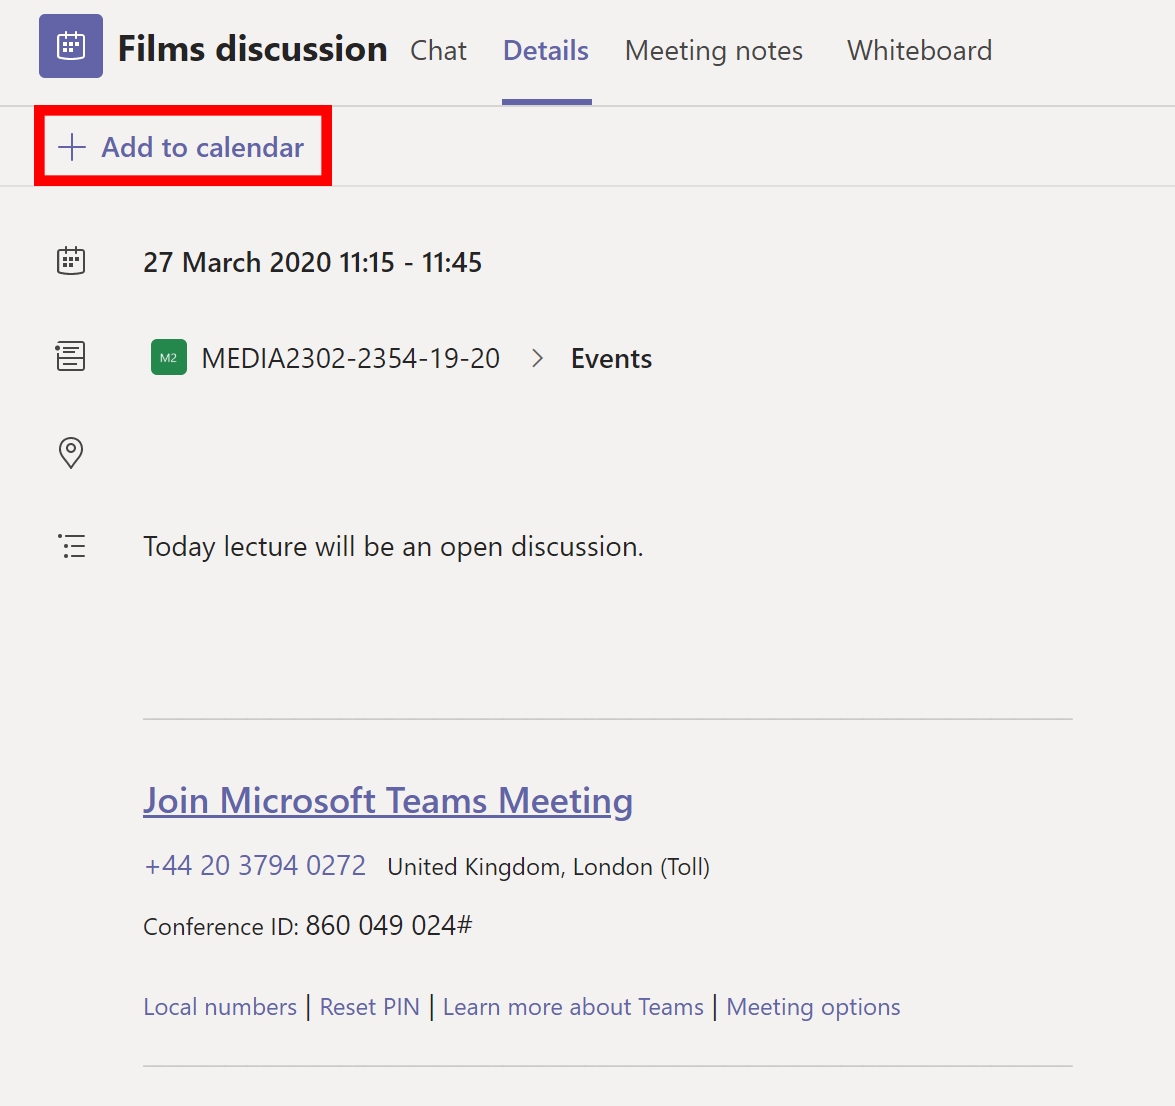 A highlight of the Teams interface showing a meetings details.